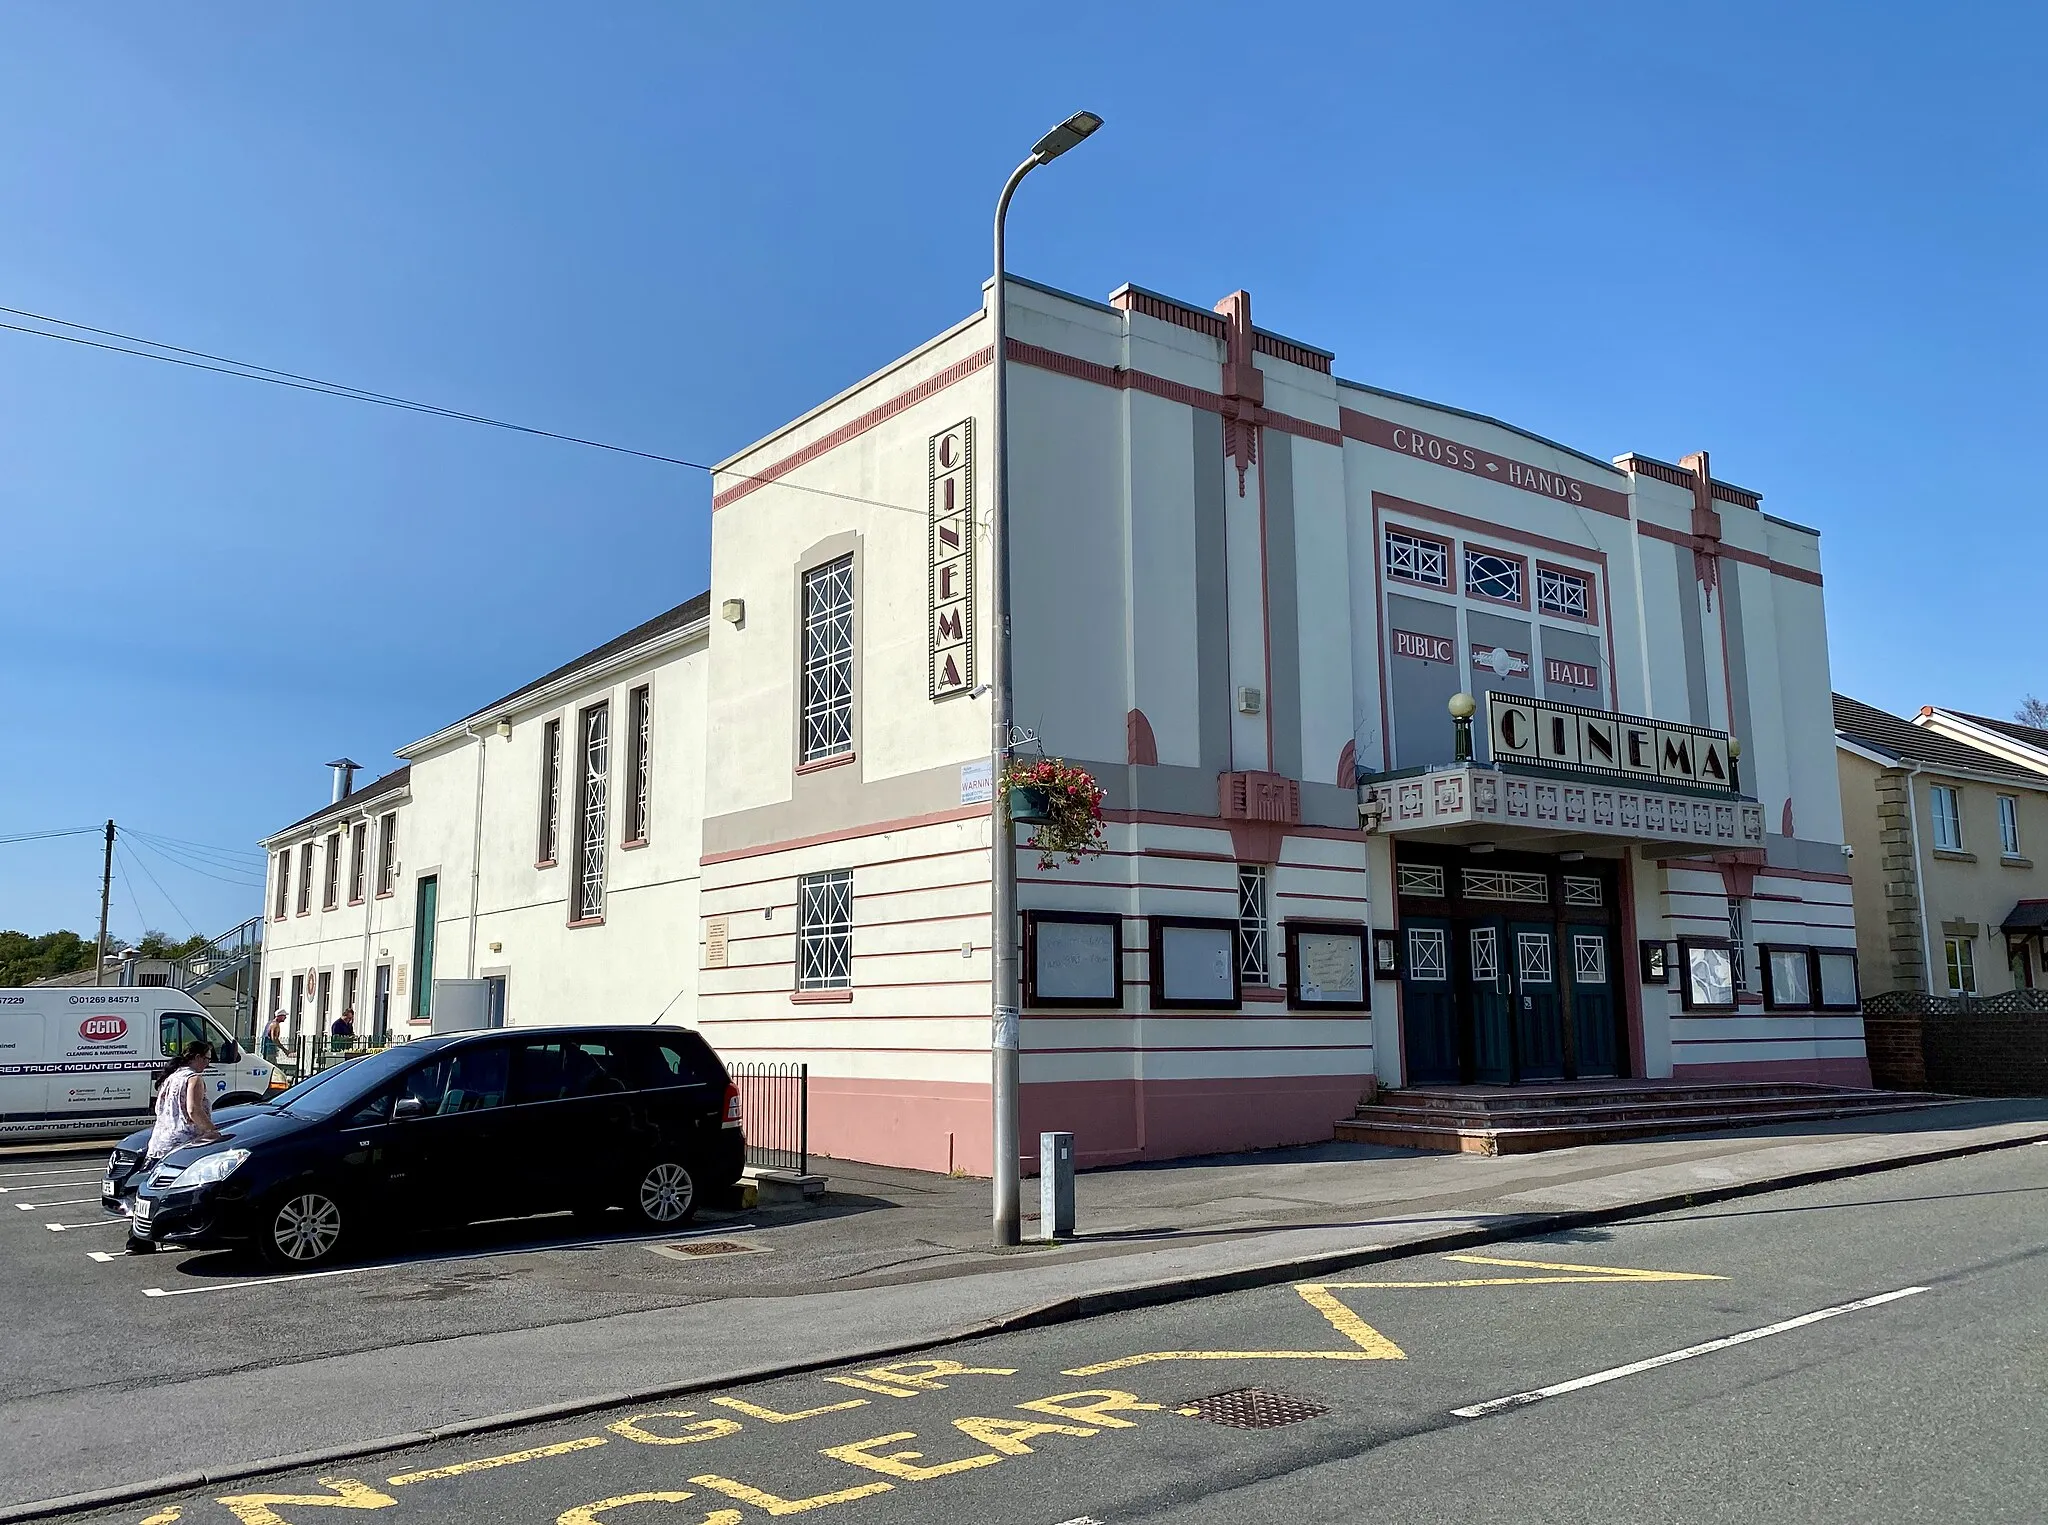 Photo showing: Cross Hands Cinema. Cross Hands Public Hall dates back to 1904, when it served as an entertainment centre for the local area. It underwent restoration in the mid-90s when it re-opened primarily as a cinema, run by volunteers, and it's now a beautiful example of a carefully-restored art deco cinema, one of only three of its kind in Wales.